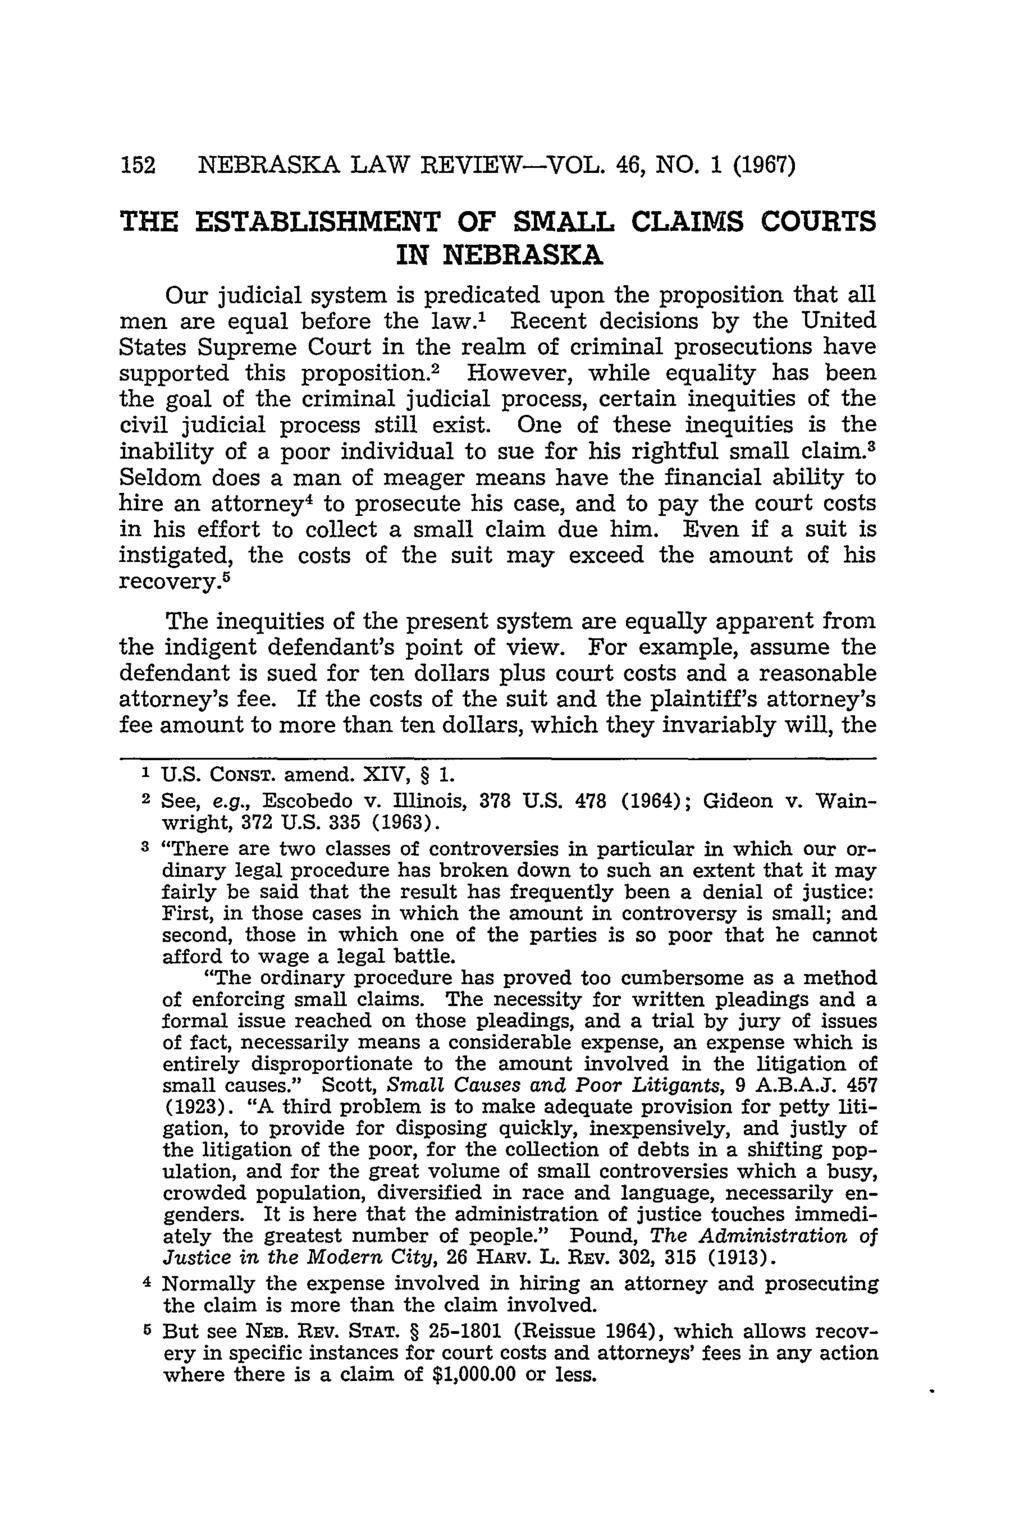 152 NEBRASKA LAW REVIEW-VOL. 46, NO. 1 (1967) THE ESTABLISHMENT OF SMALL CLAIMS COURTS IN NEBRASKA Our judicial system is predicated upon the proposition that all men are equal before the law.